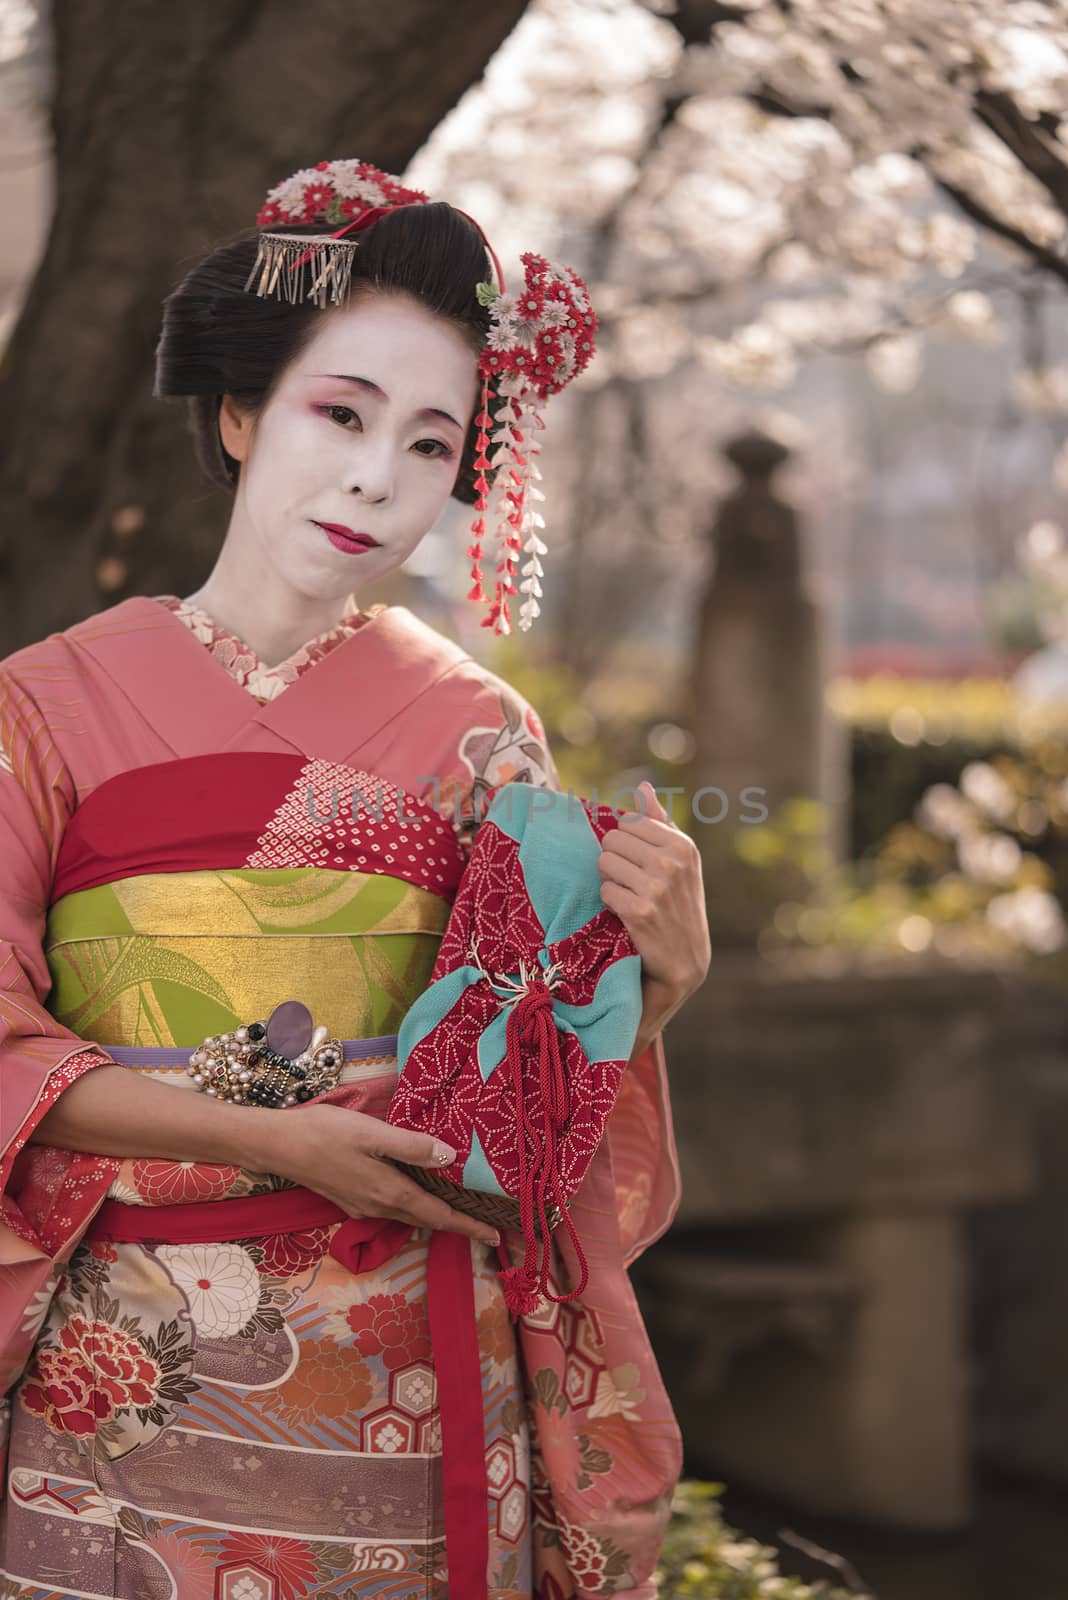 Maiko in kimono posing in front of a cherry blossom by kuremo